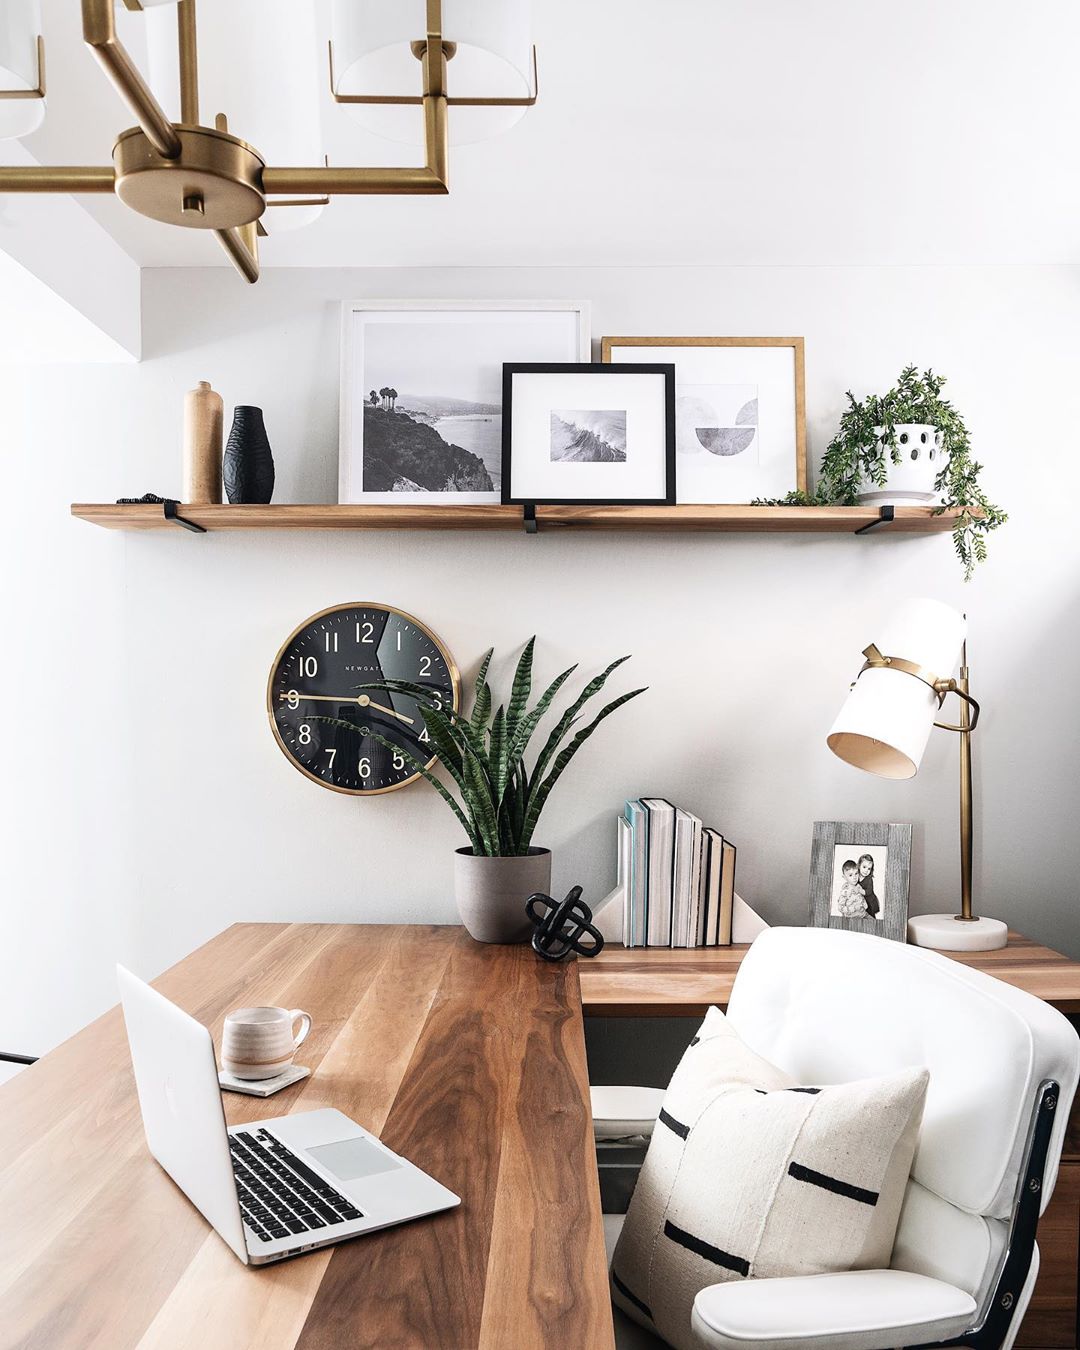 home office space with wodden desk and clock on the wall photo by Instagram user @leclairdecor